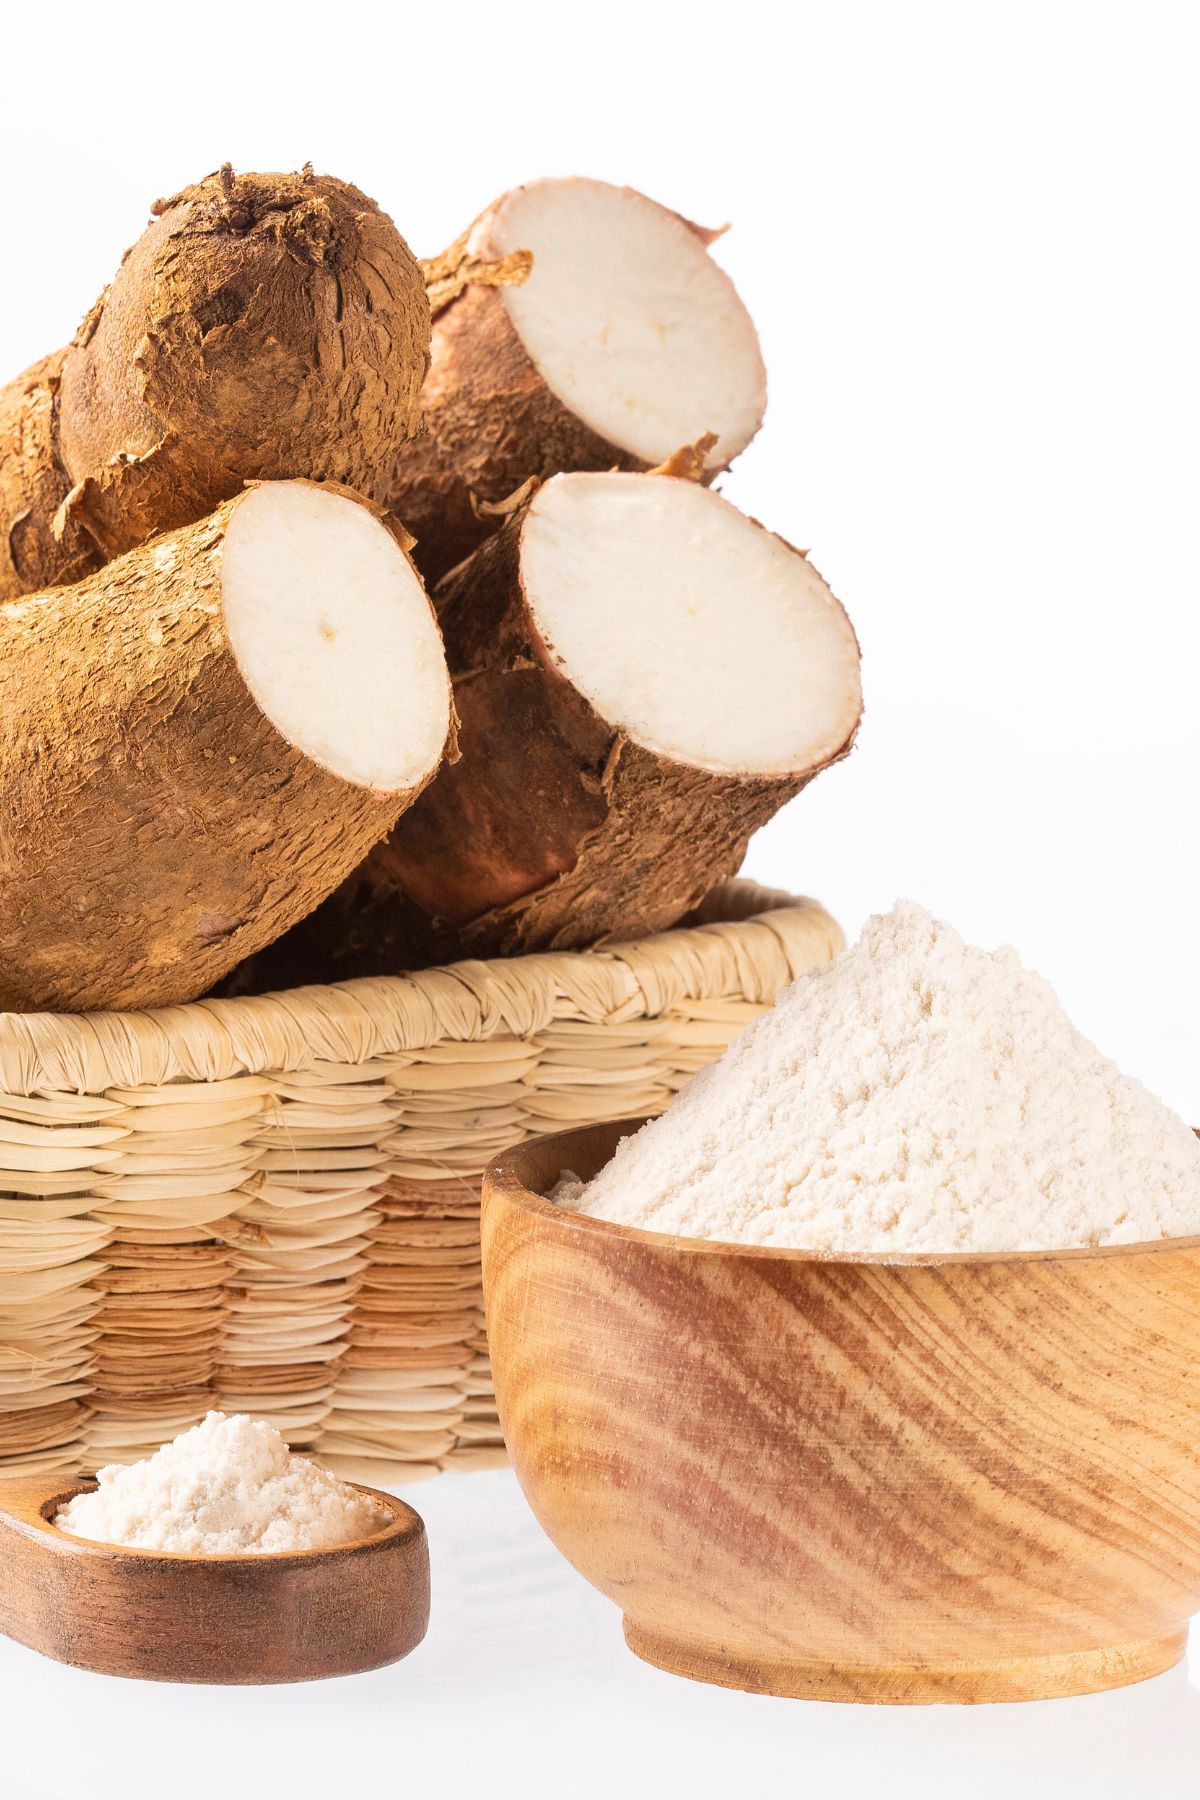 7 Best Substitutes for Arrowroot Flour - Clean Eating Kitchen